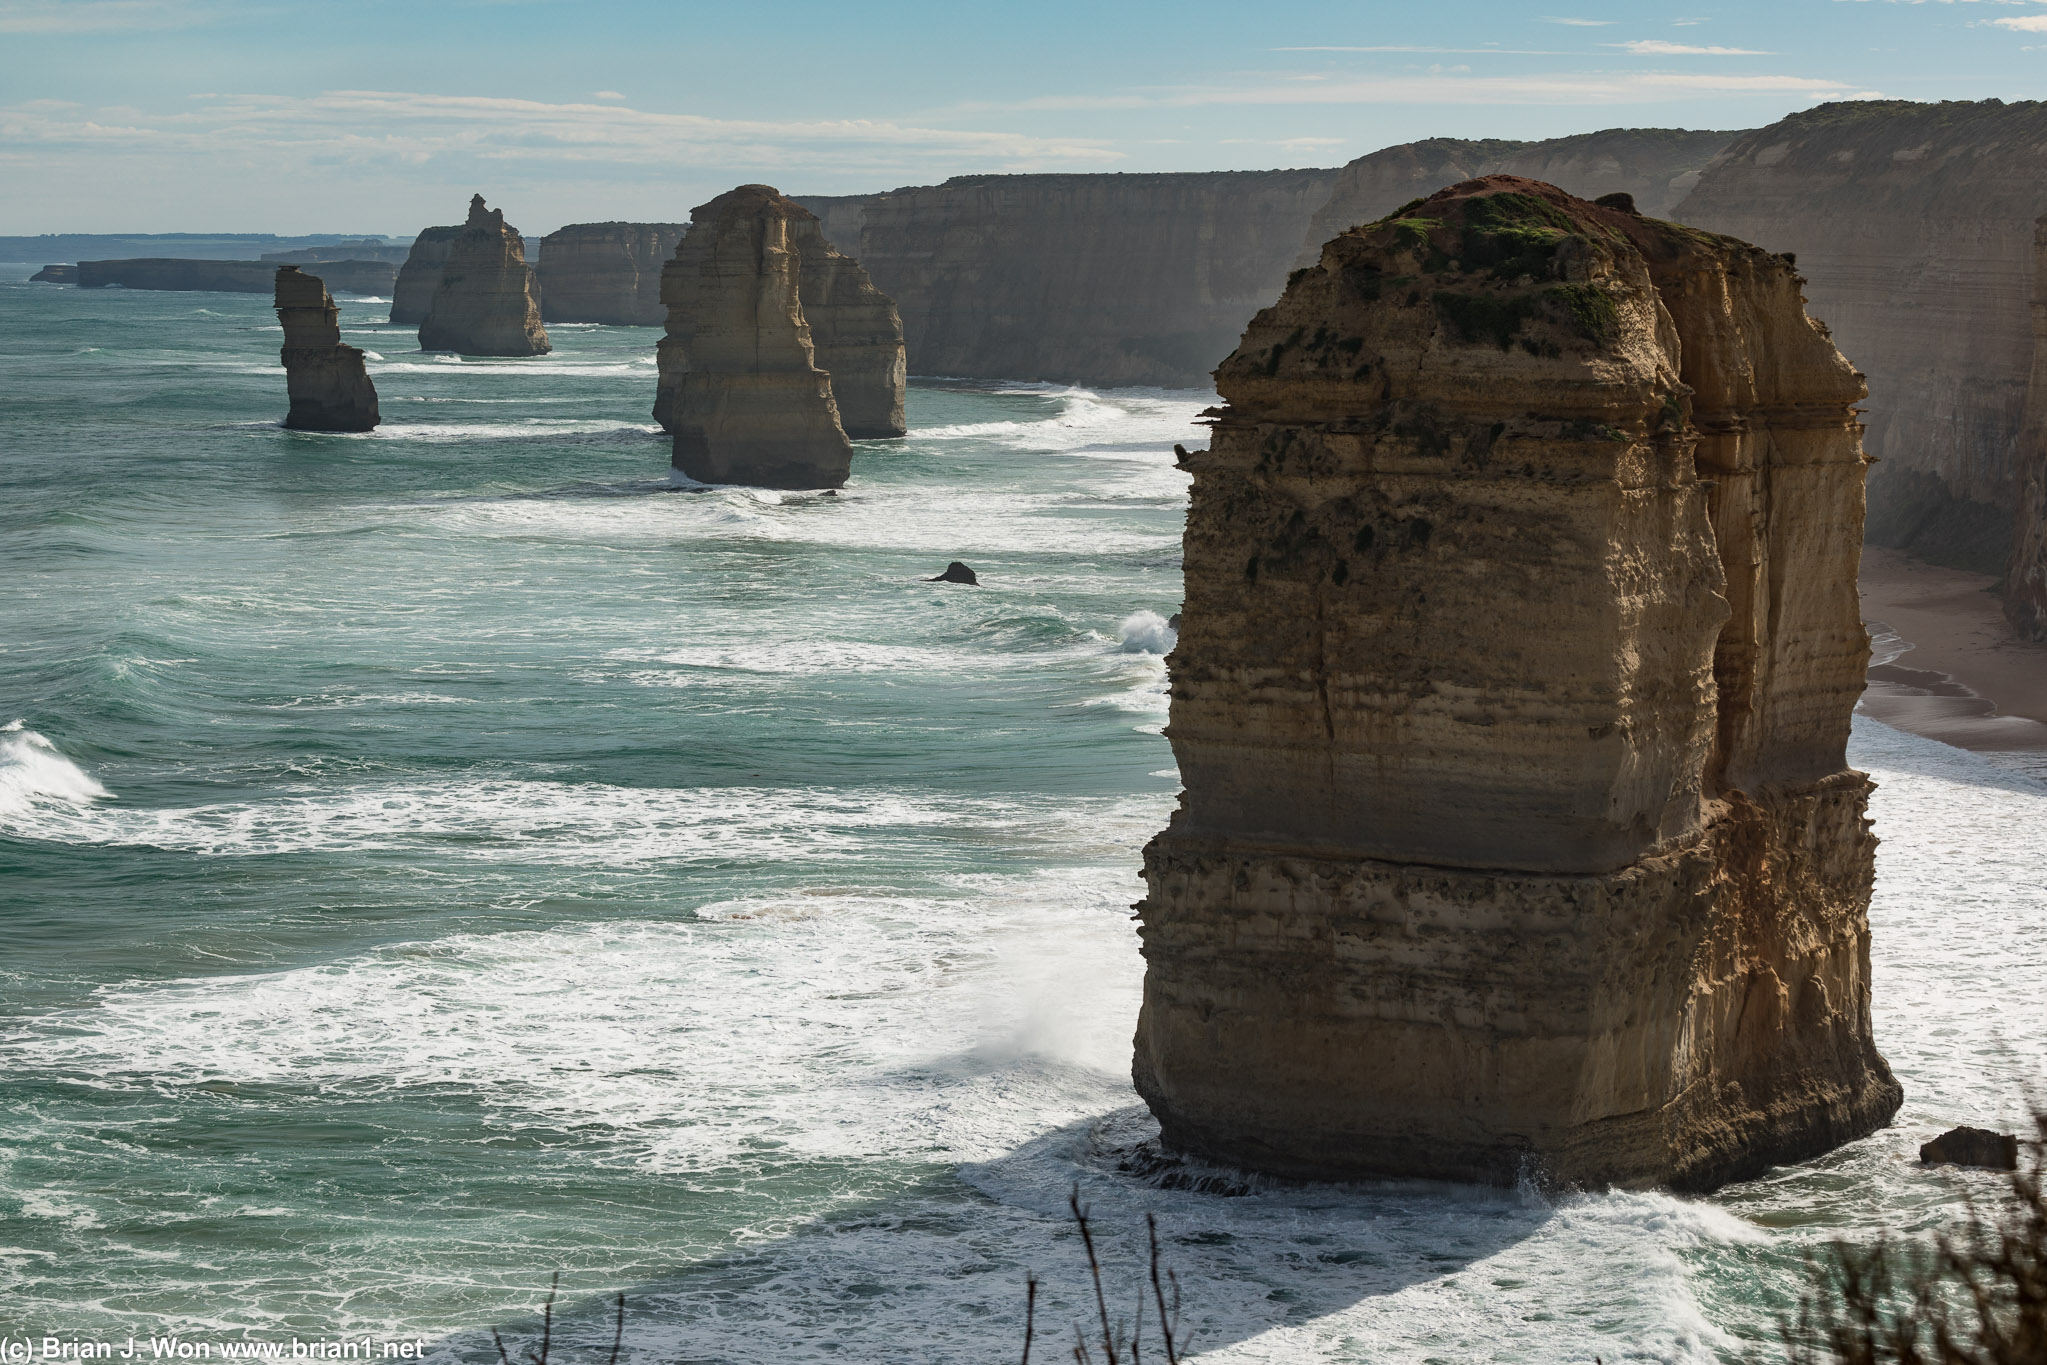 Different angle of The Twelve Apostles.